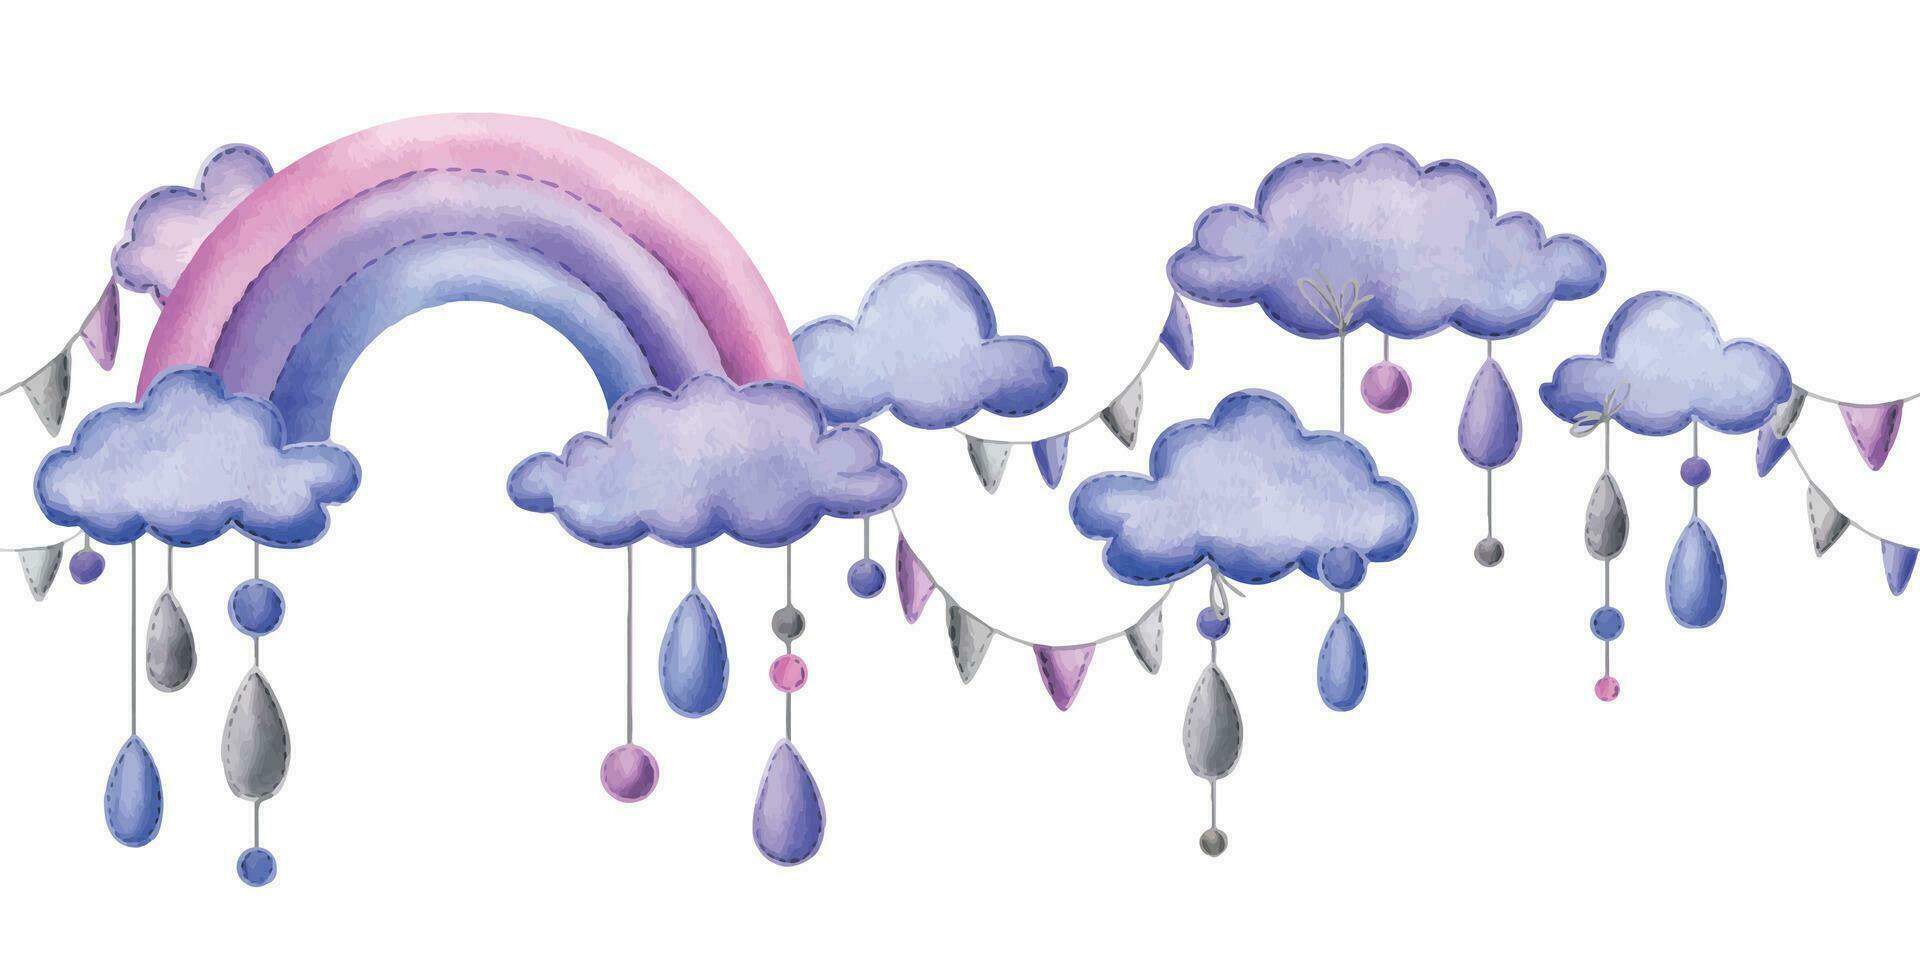 A stitched rainbow with clouds and raindrops hanging from ropes in blue, purple and pink. Childish cute hand drawn watercolor illustration. Seamless border on a white background vector